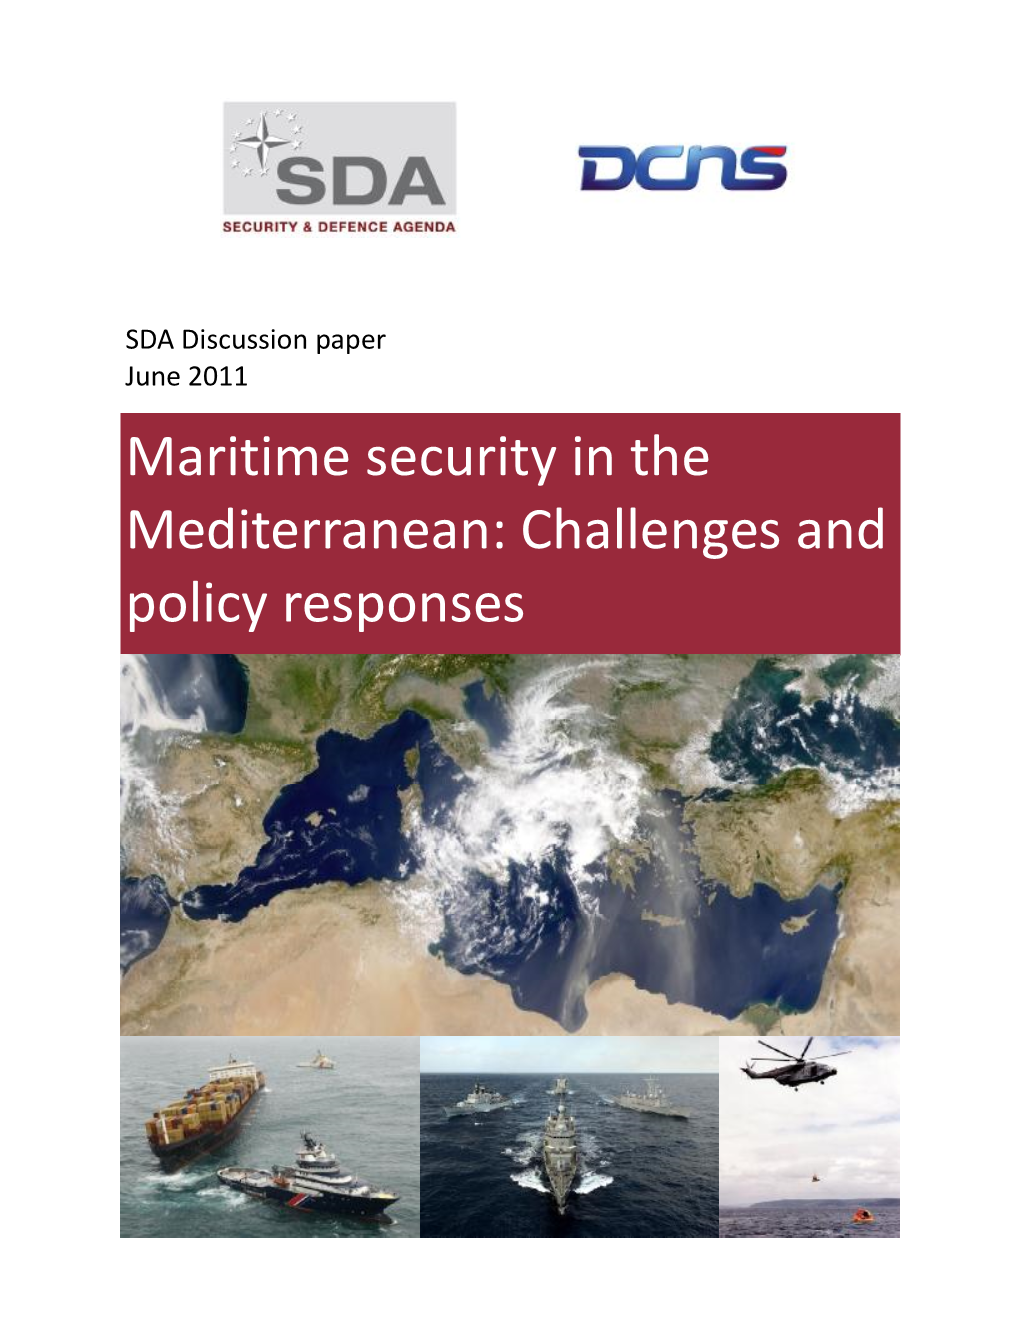 Maritime Security in the Mediterranean: Challenges and Policy Responses